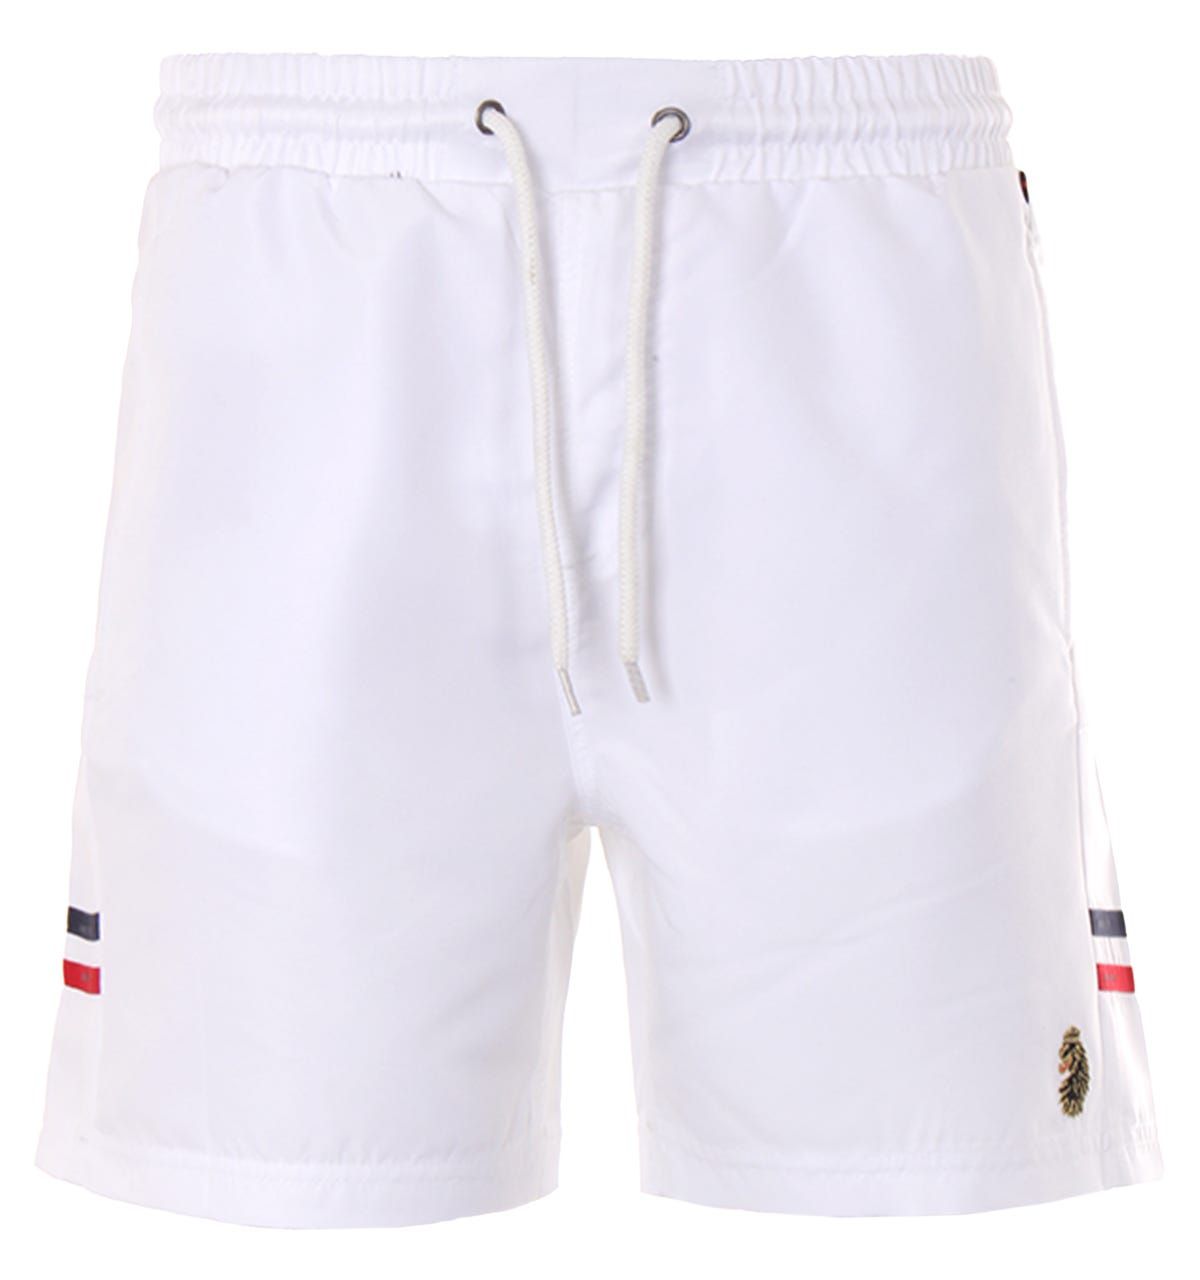 Luke 1977 is, without a doubt, the go-to brand if you're after a well crafted, witty and masculine item. Finished with the signature Luke Lion logo and taping, you're looking at one of the UK\'s top contemporary menswear brands. The Tapehead Swim Shorts are the perfect addition to your holiday wardrobe. Featuring contrast tape detailing with Luke 1977 raised text on both legs. Regular Fit, Polyester Composition with Mesh Lining, Drawstring Waist, Twin Side Seam Pockets, Contrast Tape Detailing, Luke 1977 Branding. Style & Fit: Regular Fit, Fits True to Size. Composition & Care: 100% Polyester, Machine Wash.